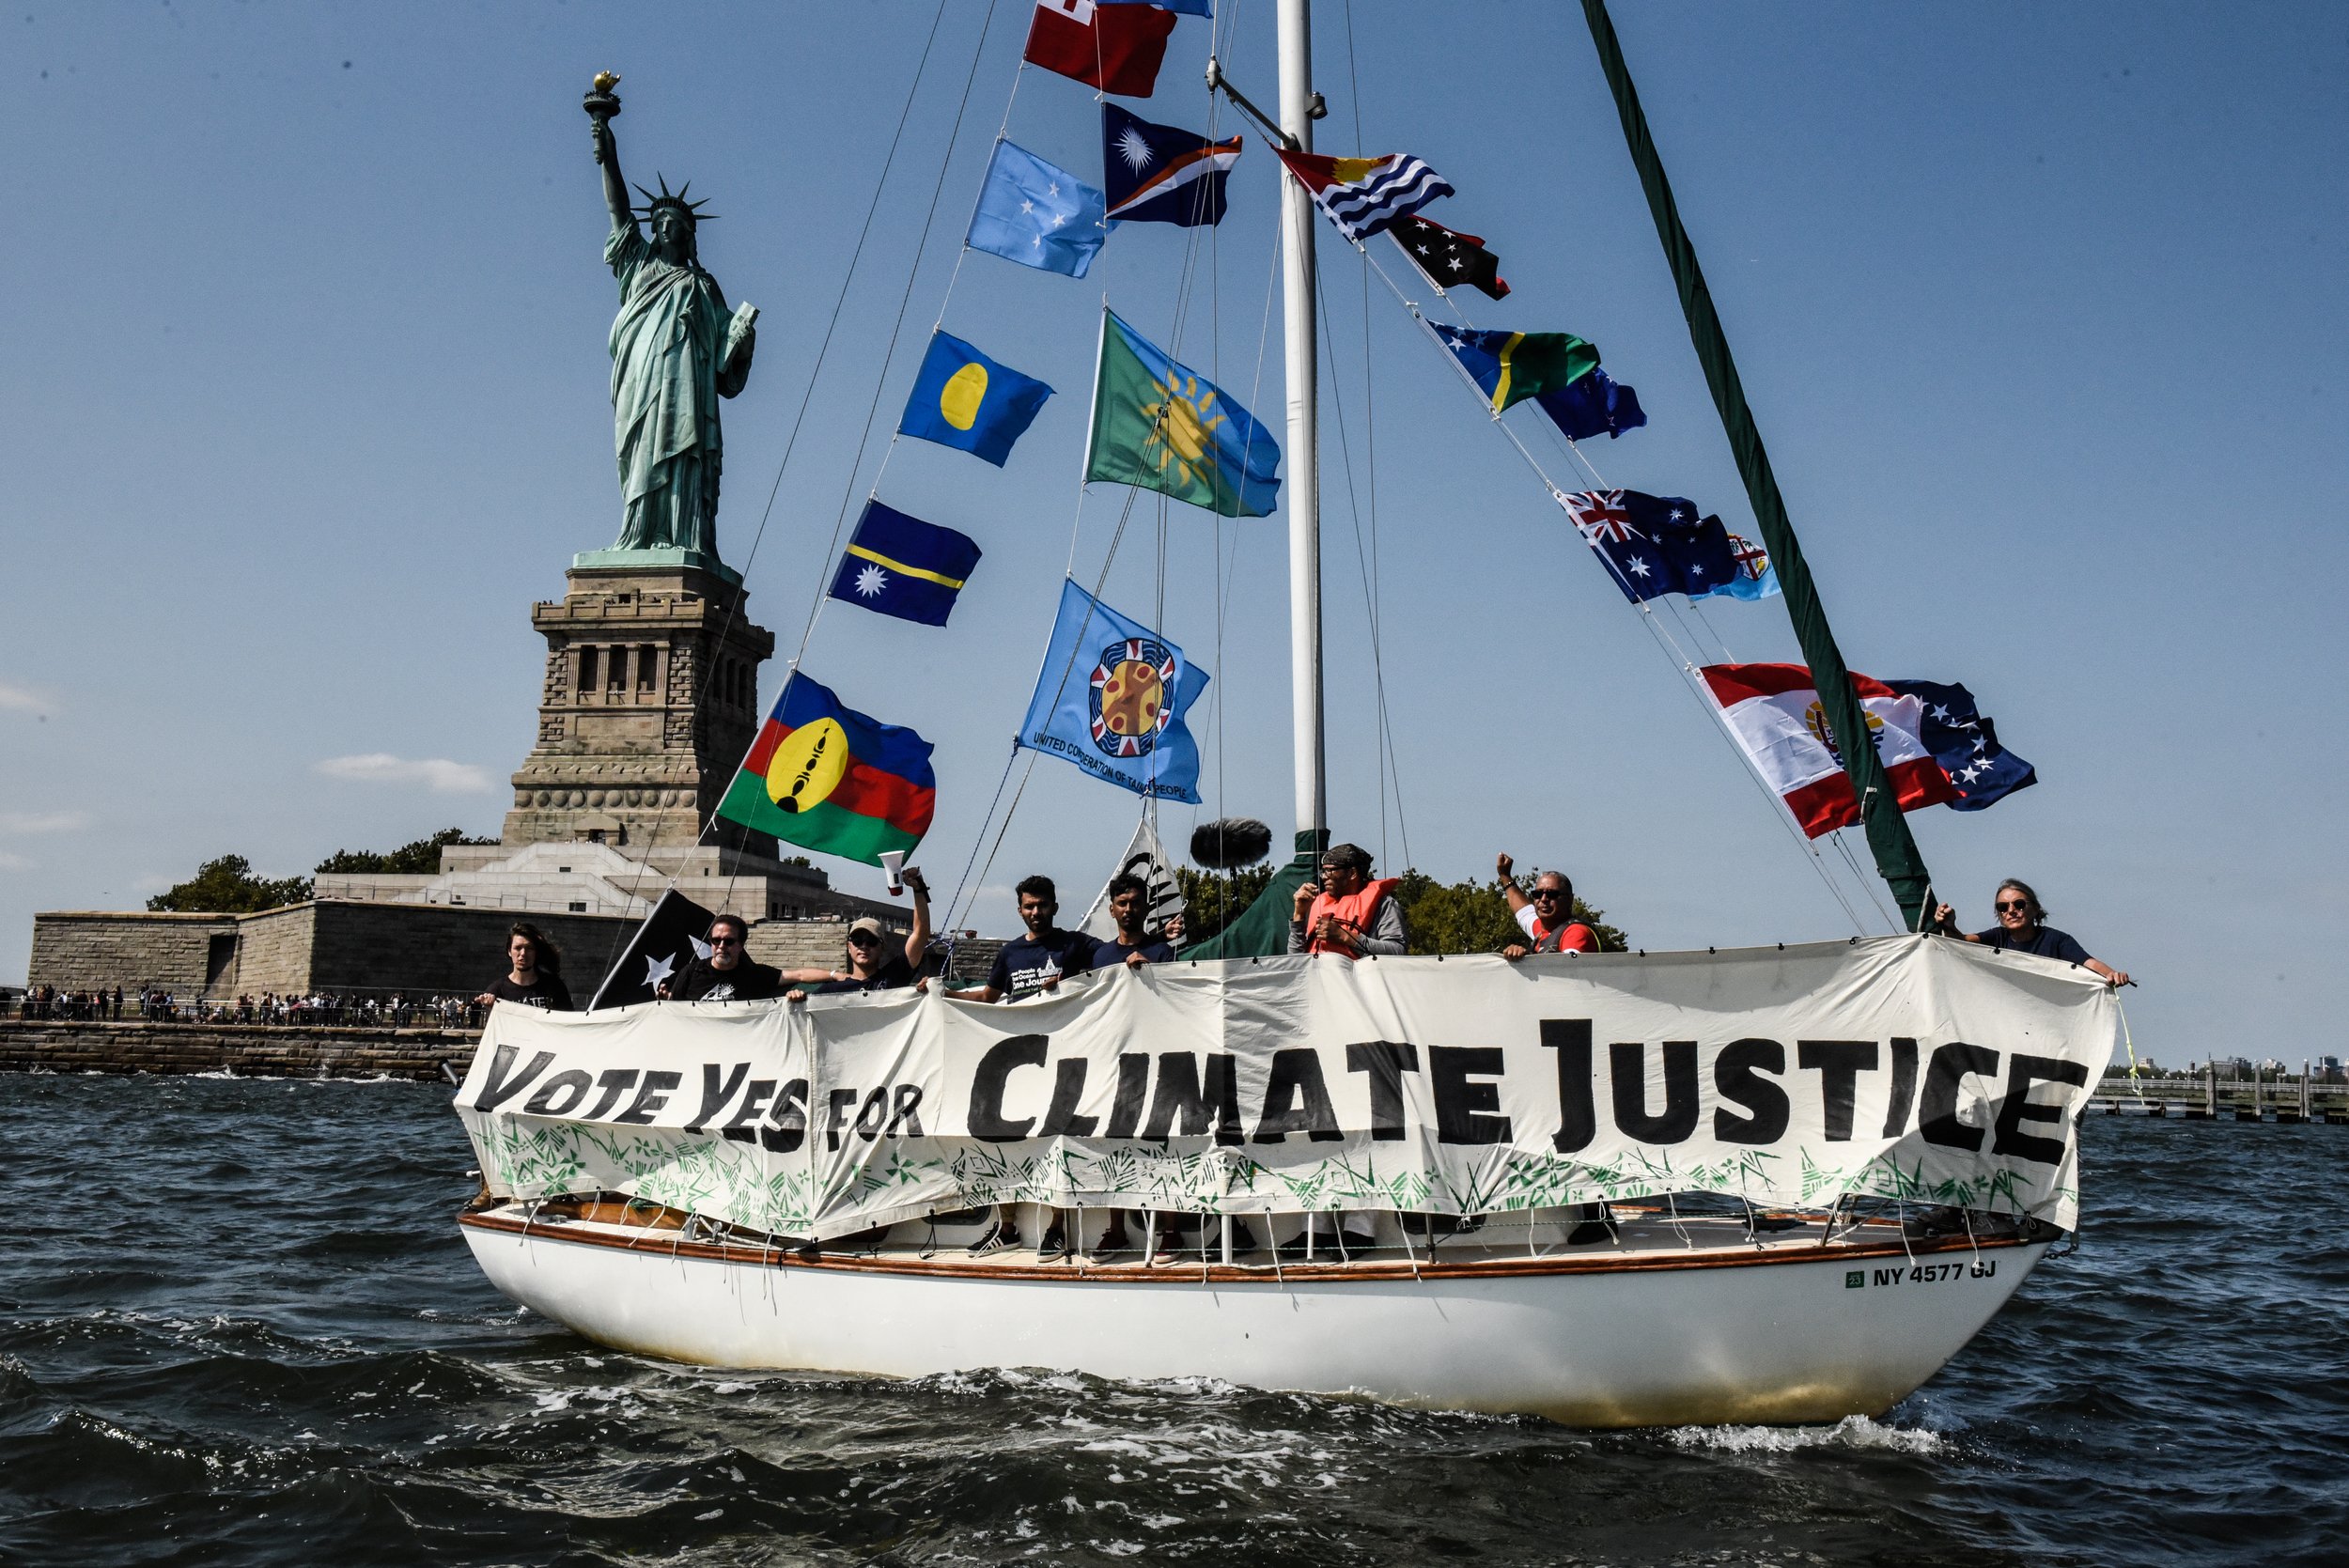 ICJAO UNGA Flotilla for Vote on Climate Action at UN in New York